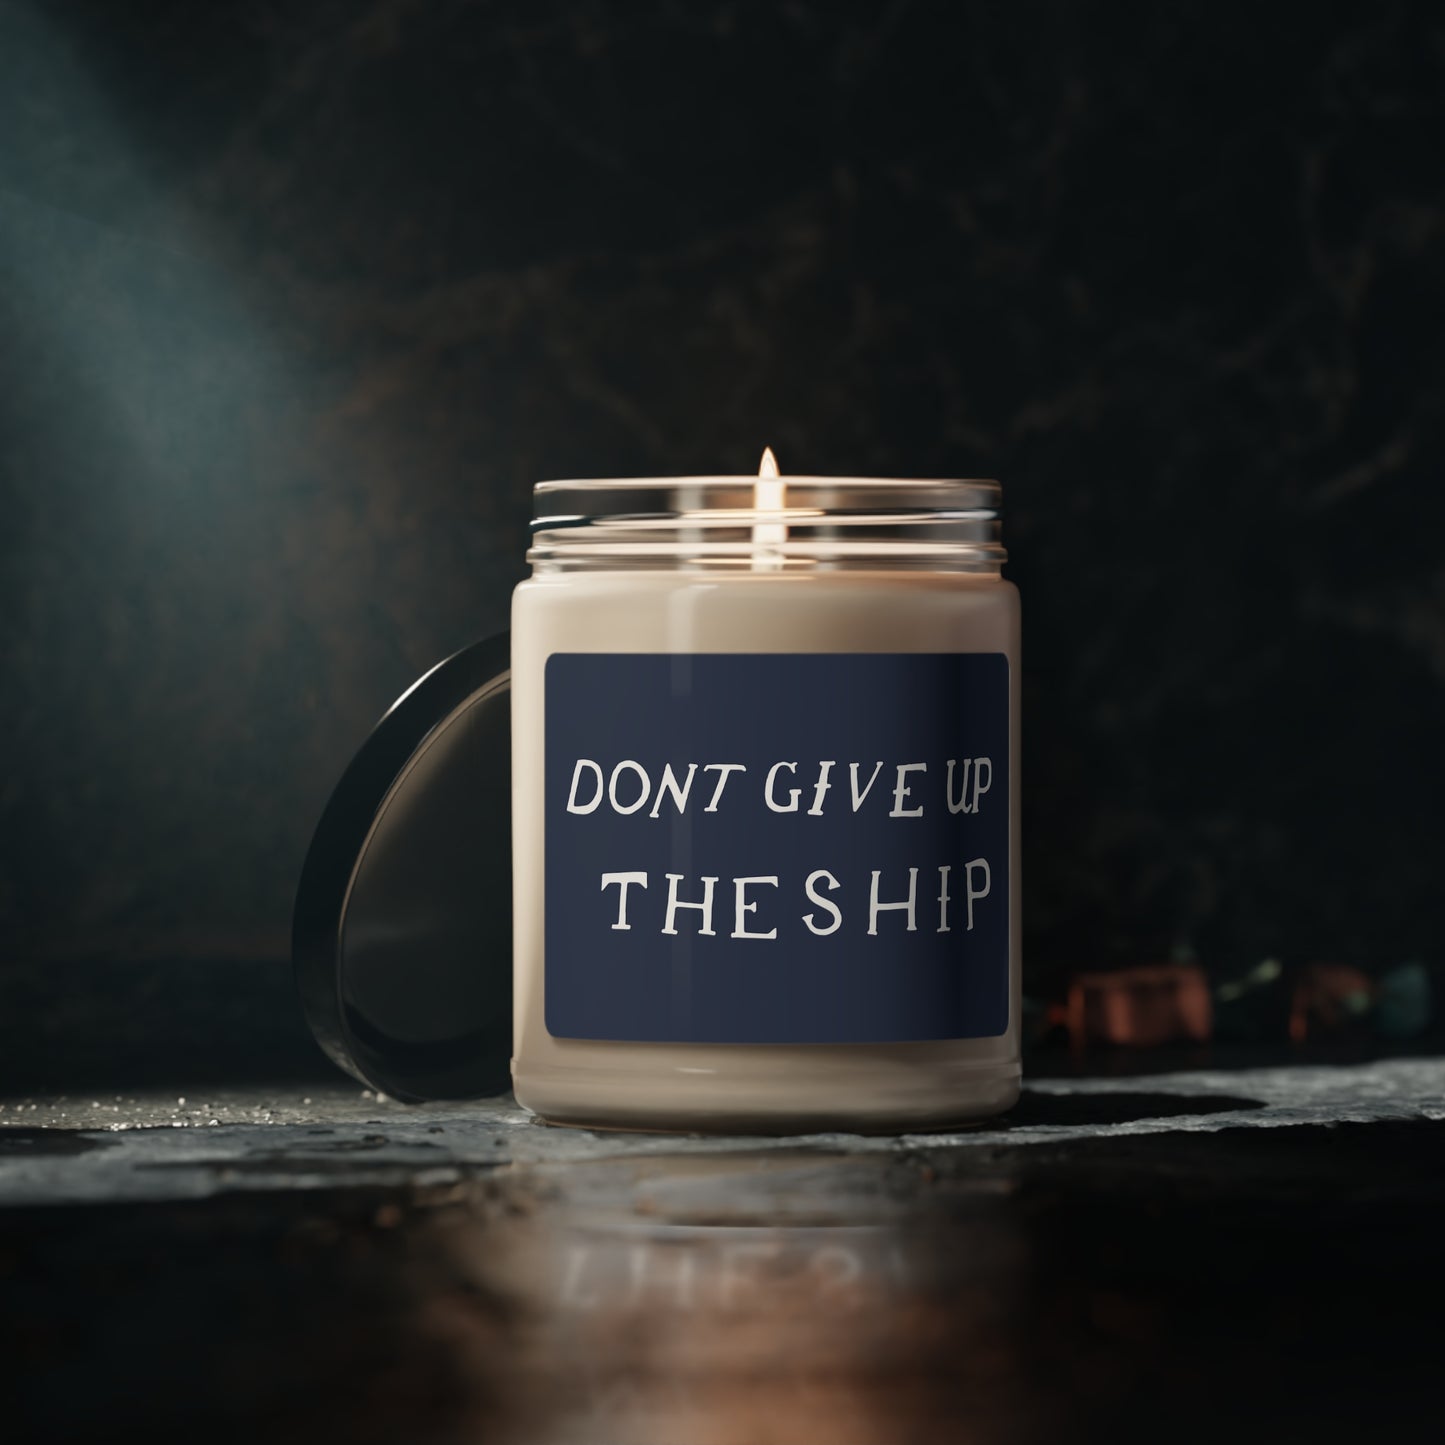 Don't Give Up The Ship Candle